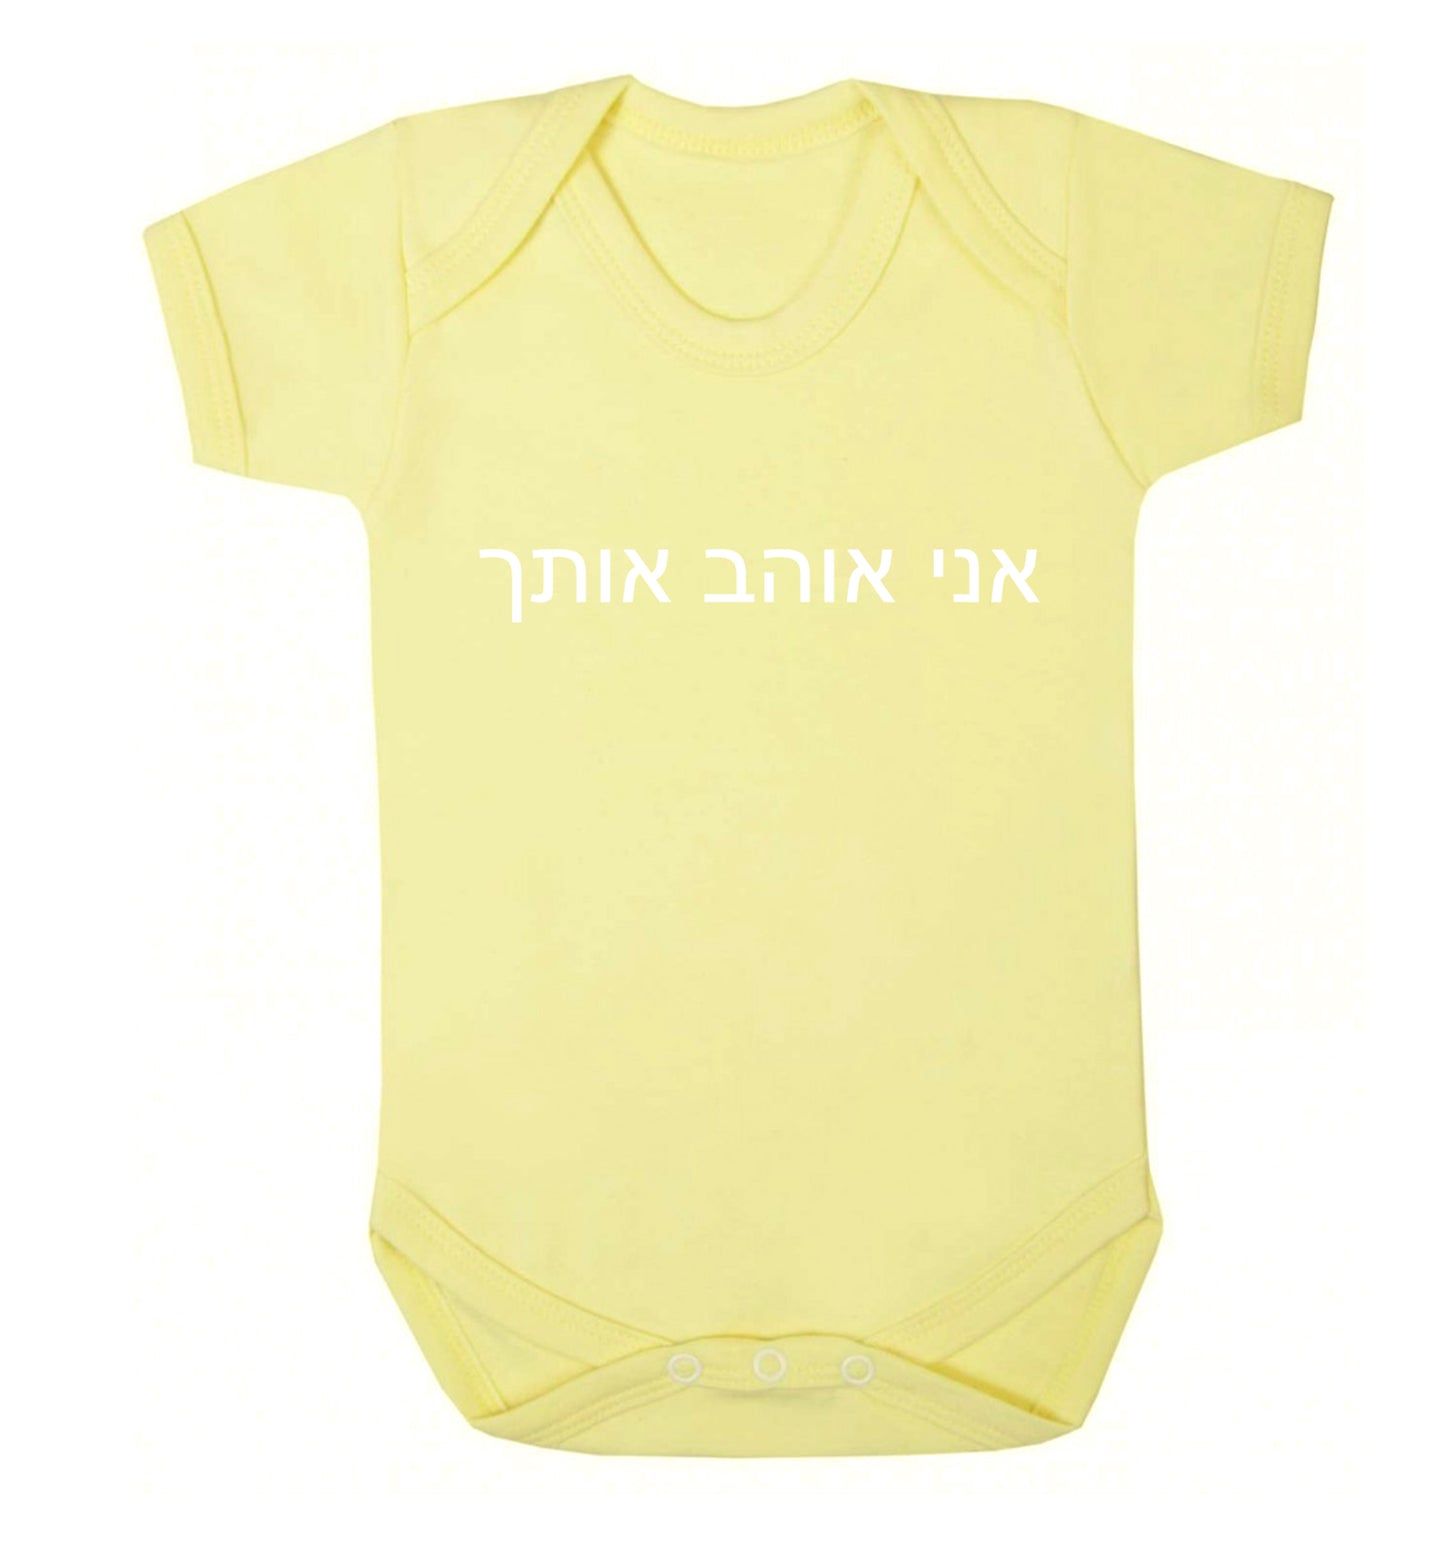 ___ ____ ____ - I love you Baby Vest pale yellow 18-24 months